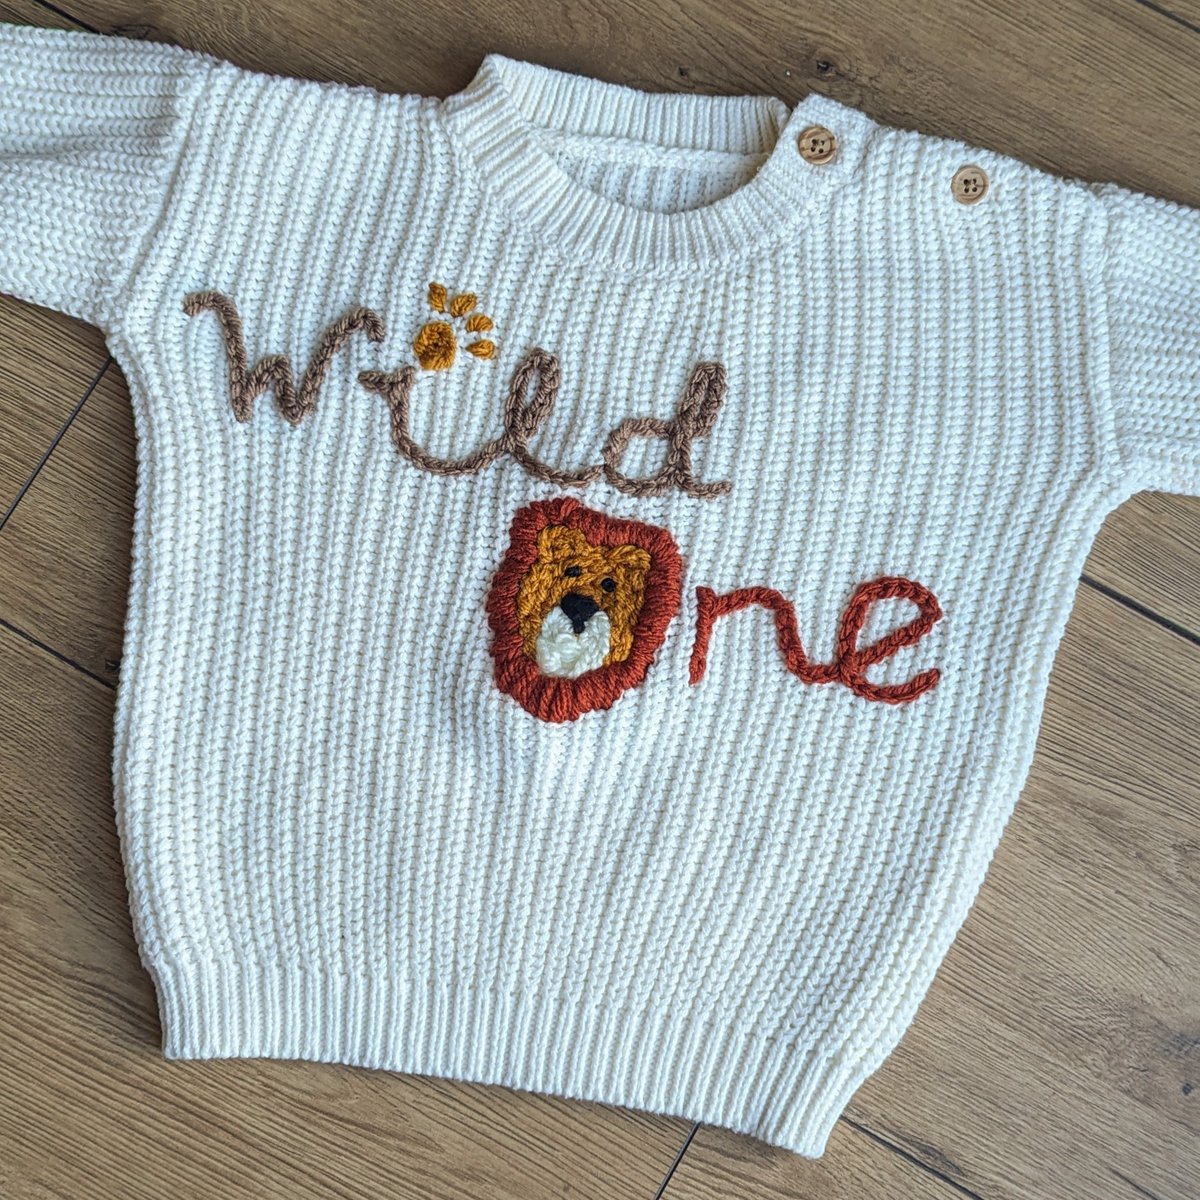 Started embroidering jumpers on mat leave 🪡🧶🌈🦁🌷